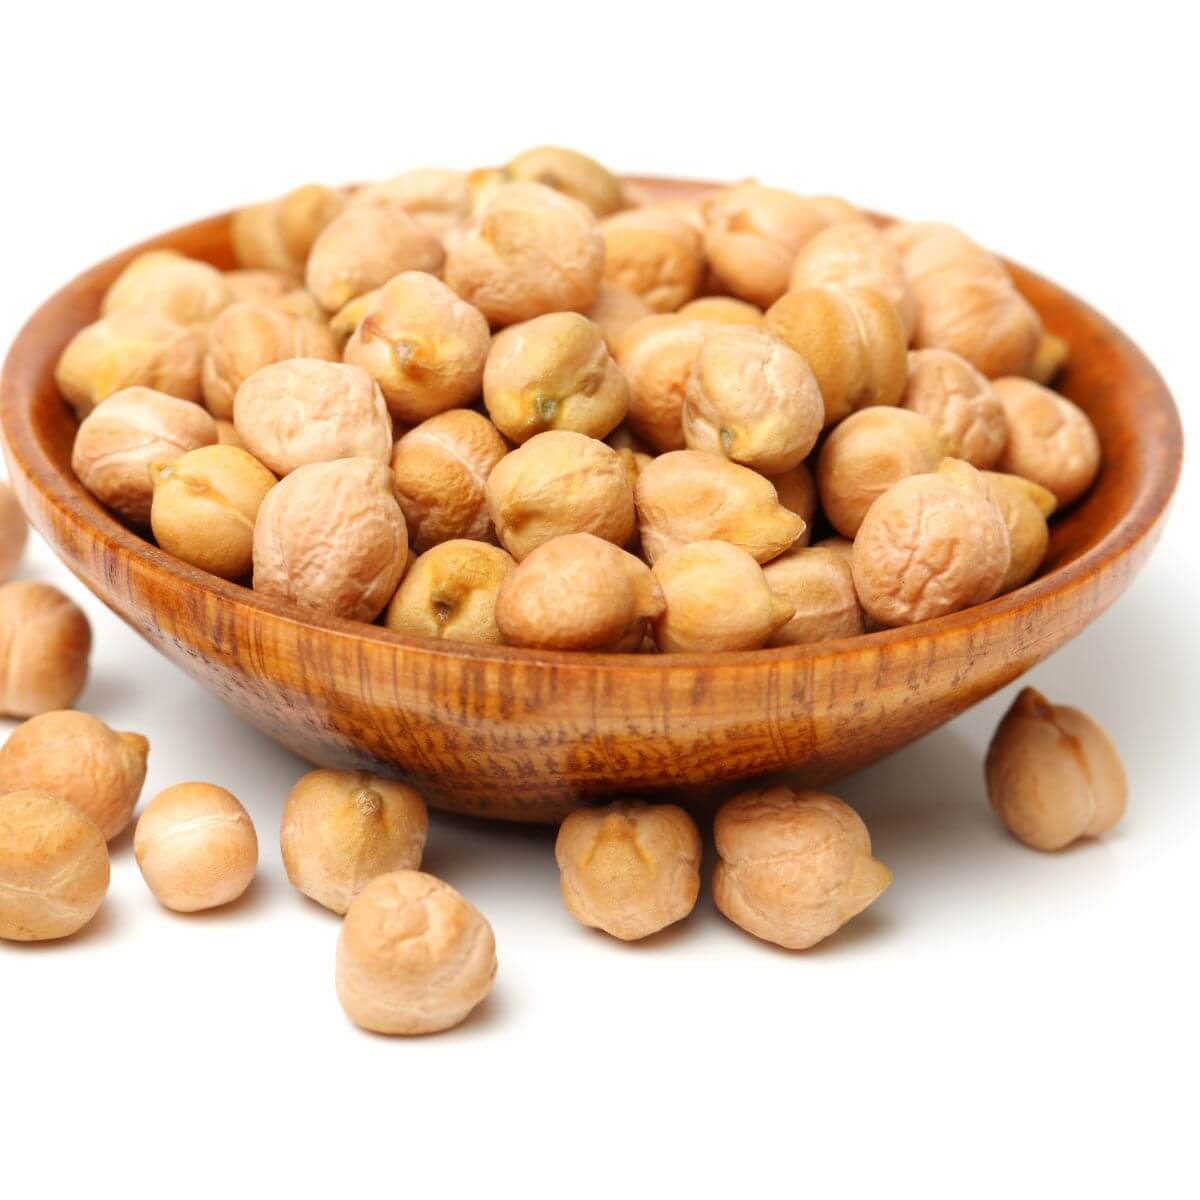 Chickpeas - Nutrition Facts and Health Benefits